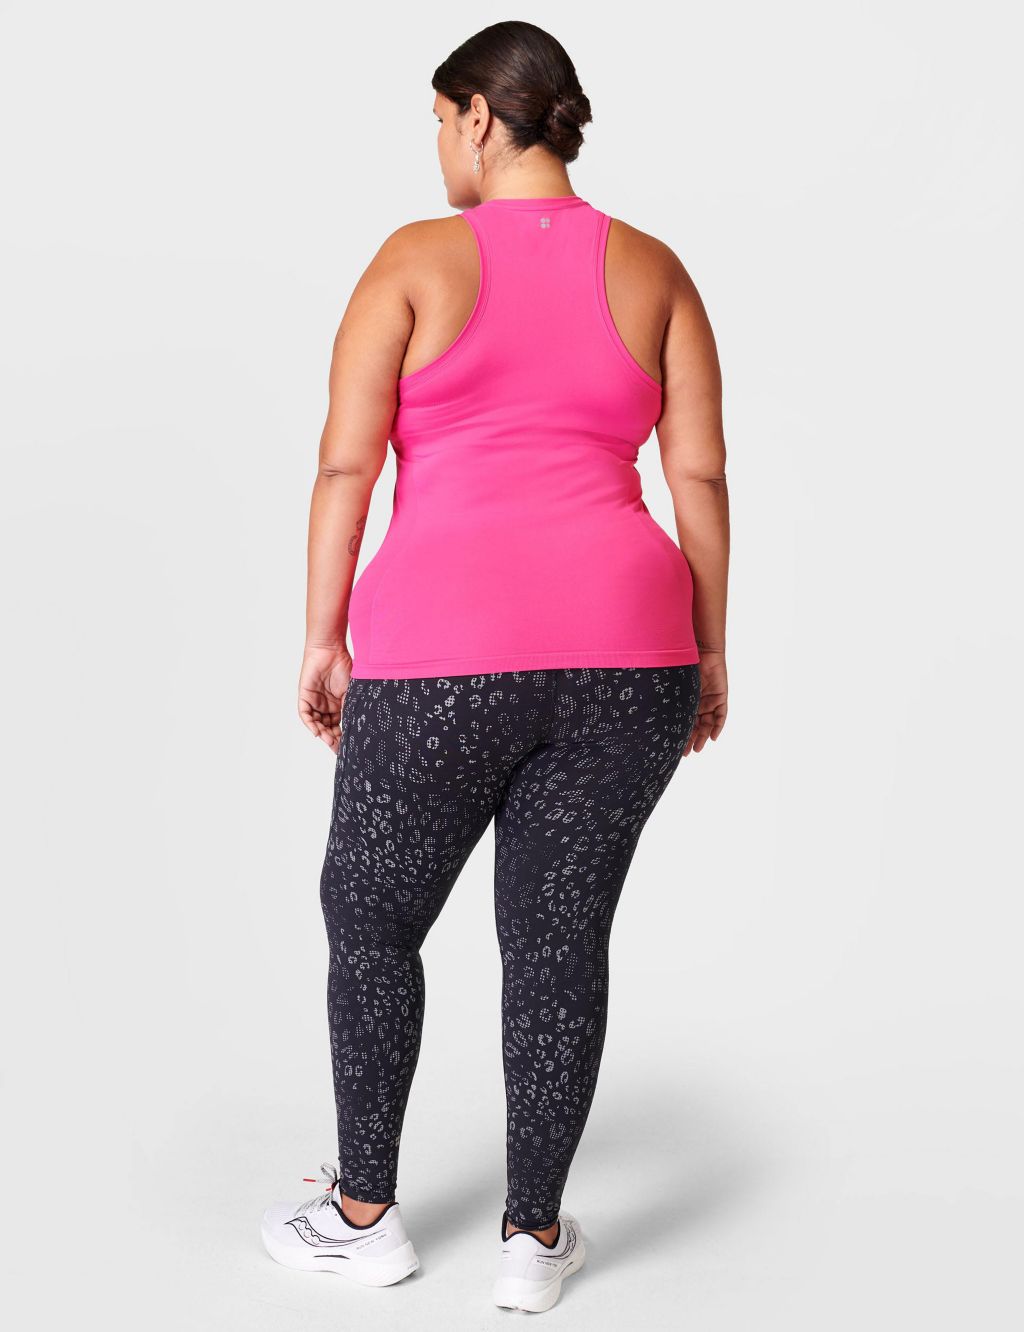 Sweaty Betty Super Sculpt Camo Red Pink Black 7/8 Leggings - Size XS - $23  (78% Off Retail) - From Amber